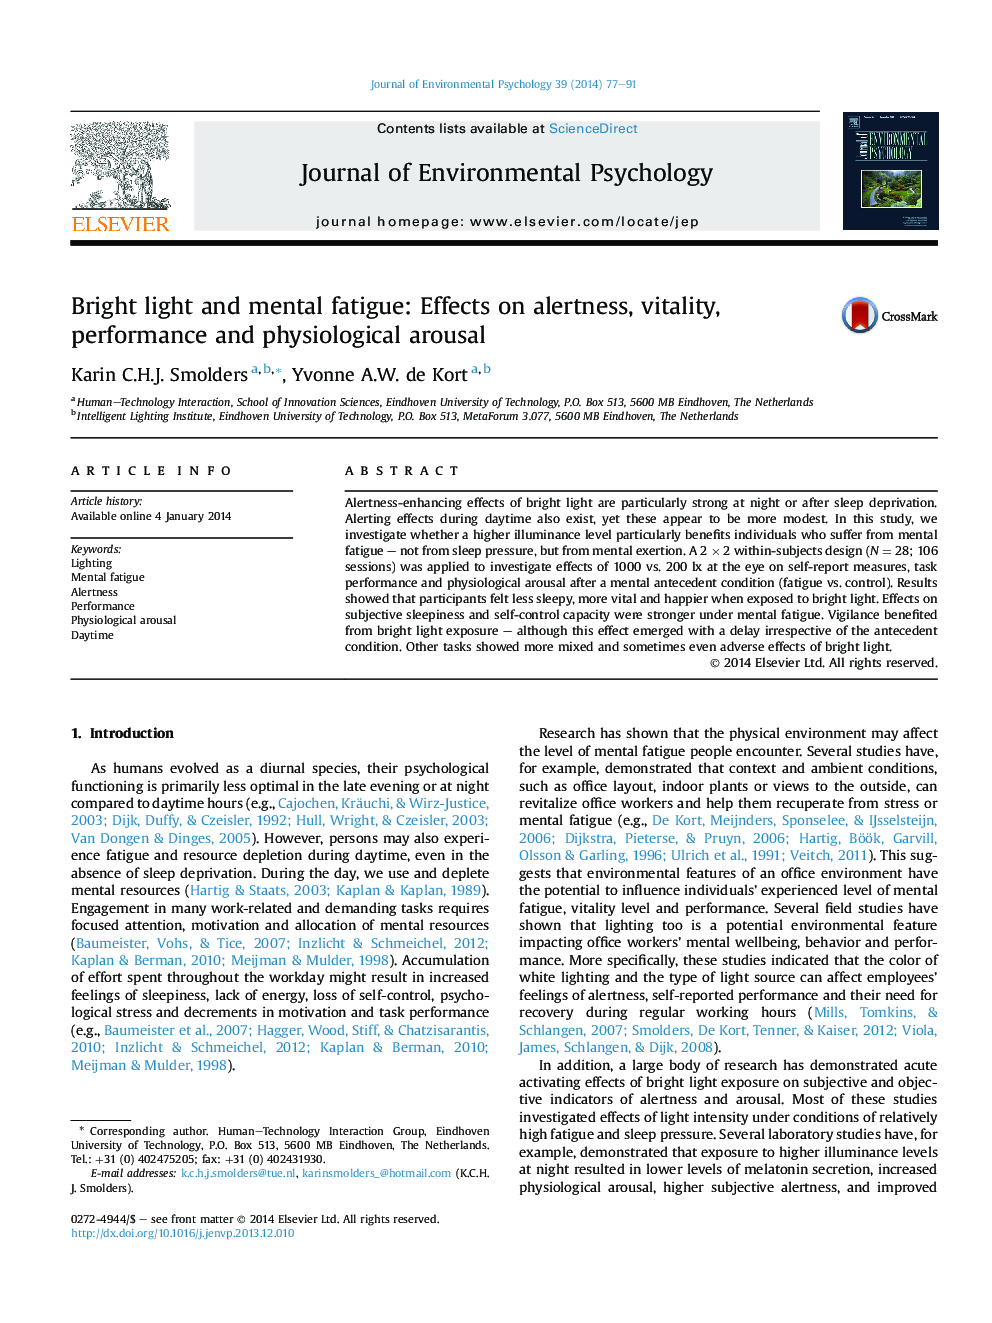 Bright light and mental fatigue: Effects on alertness, vitality, performance and physiological arousal